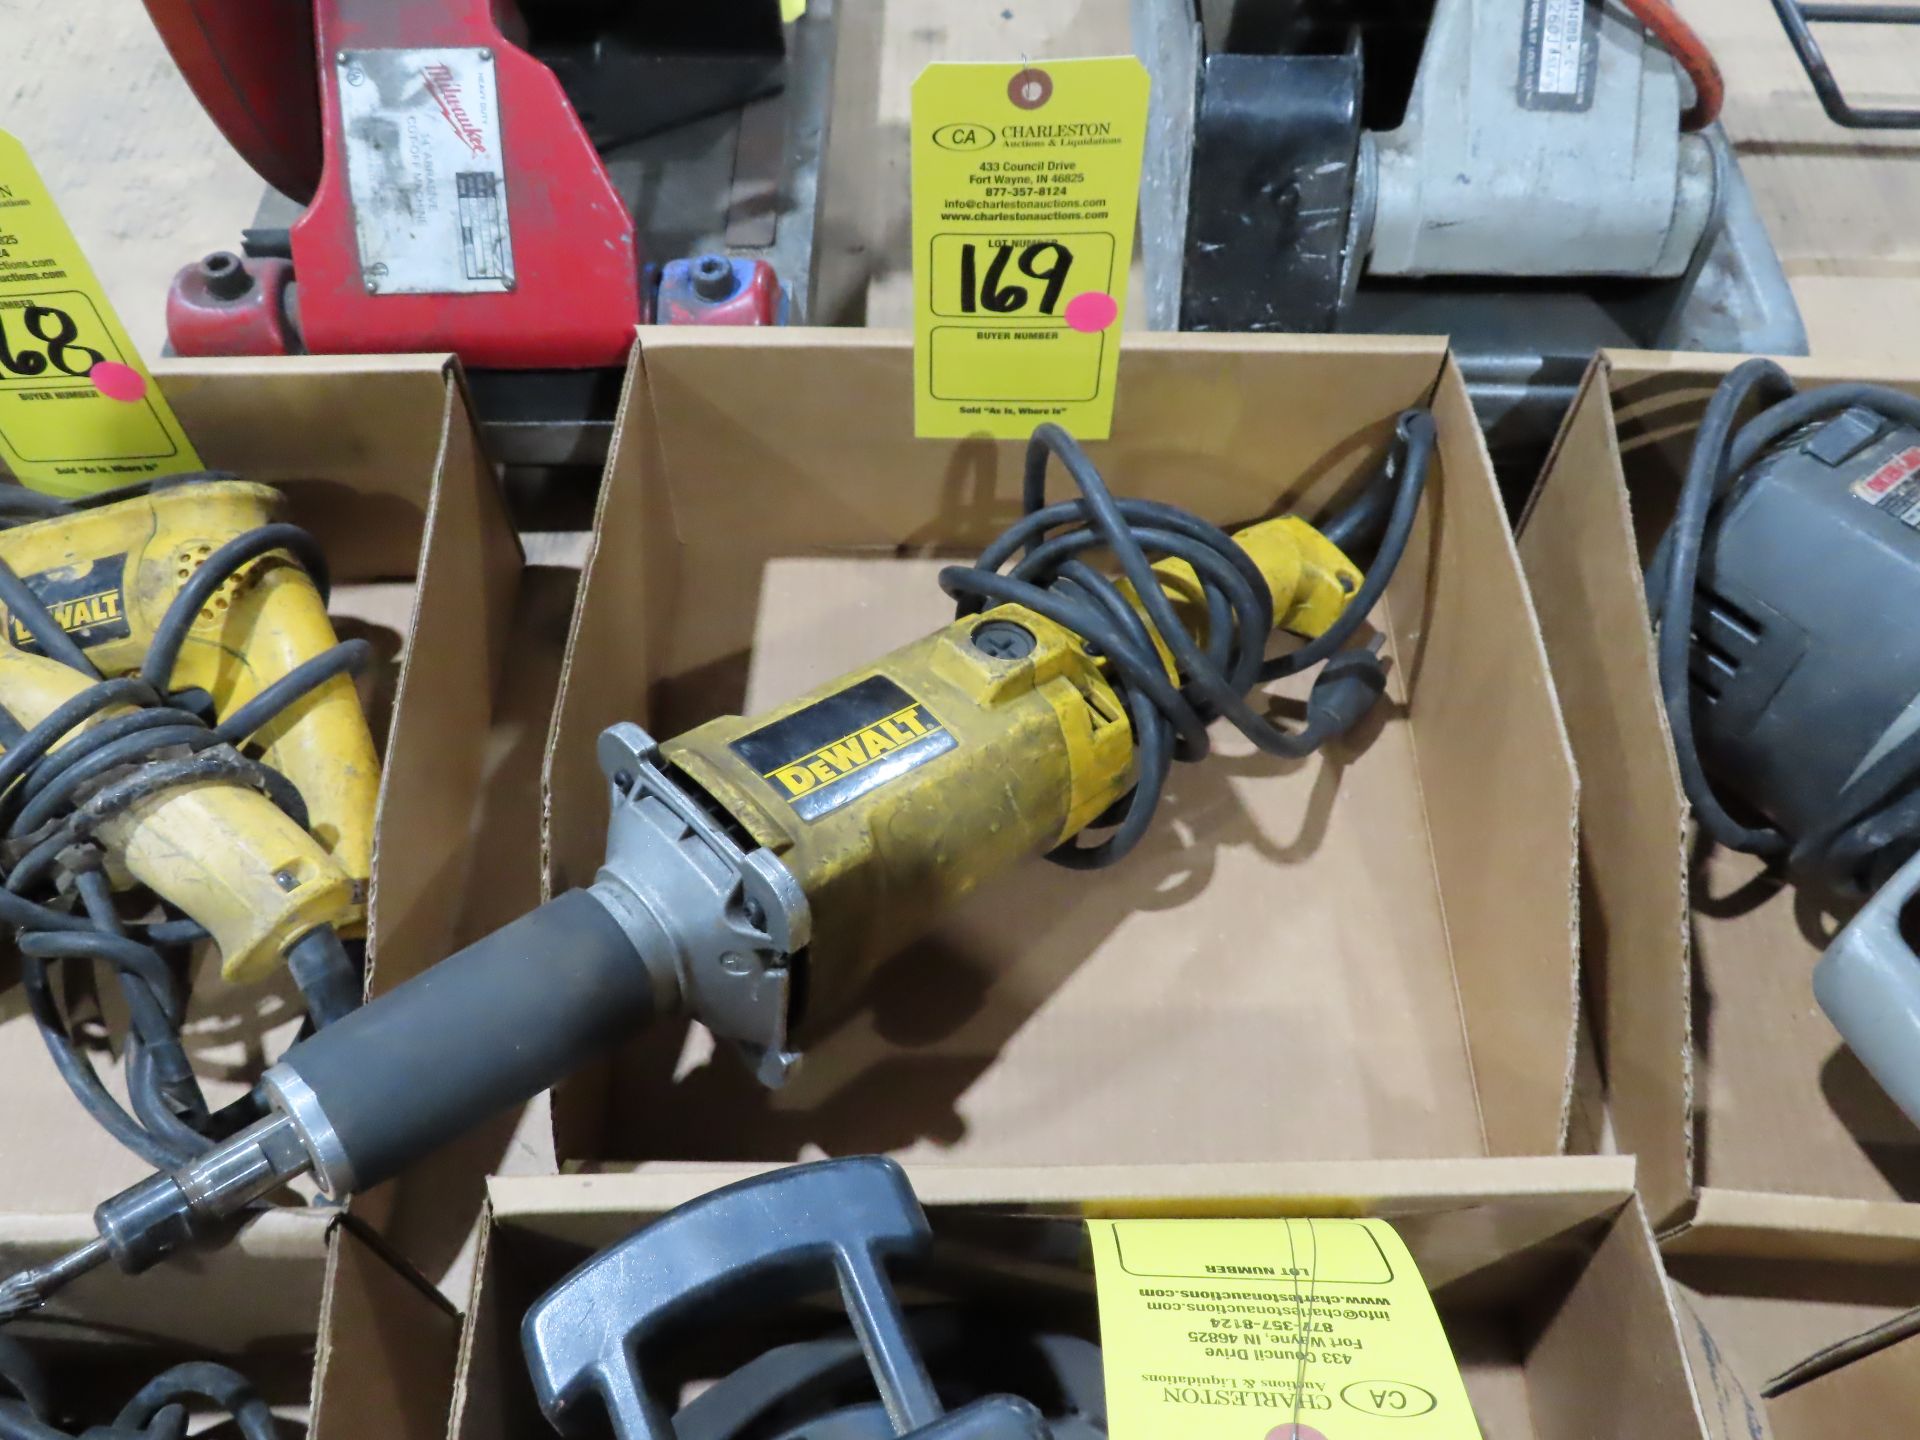 DeWalt straight grinder, as always with Brolyn LLC auctions, all lots can be picked up from